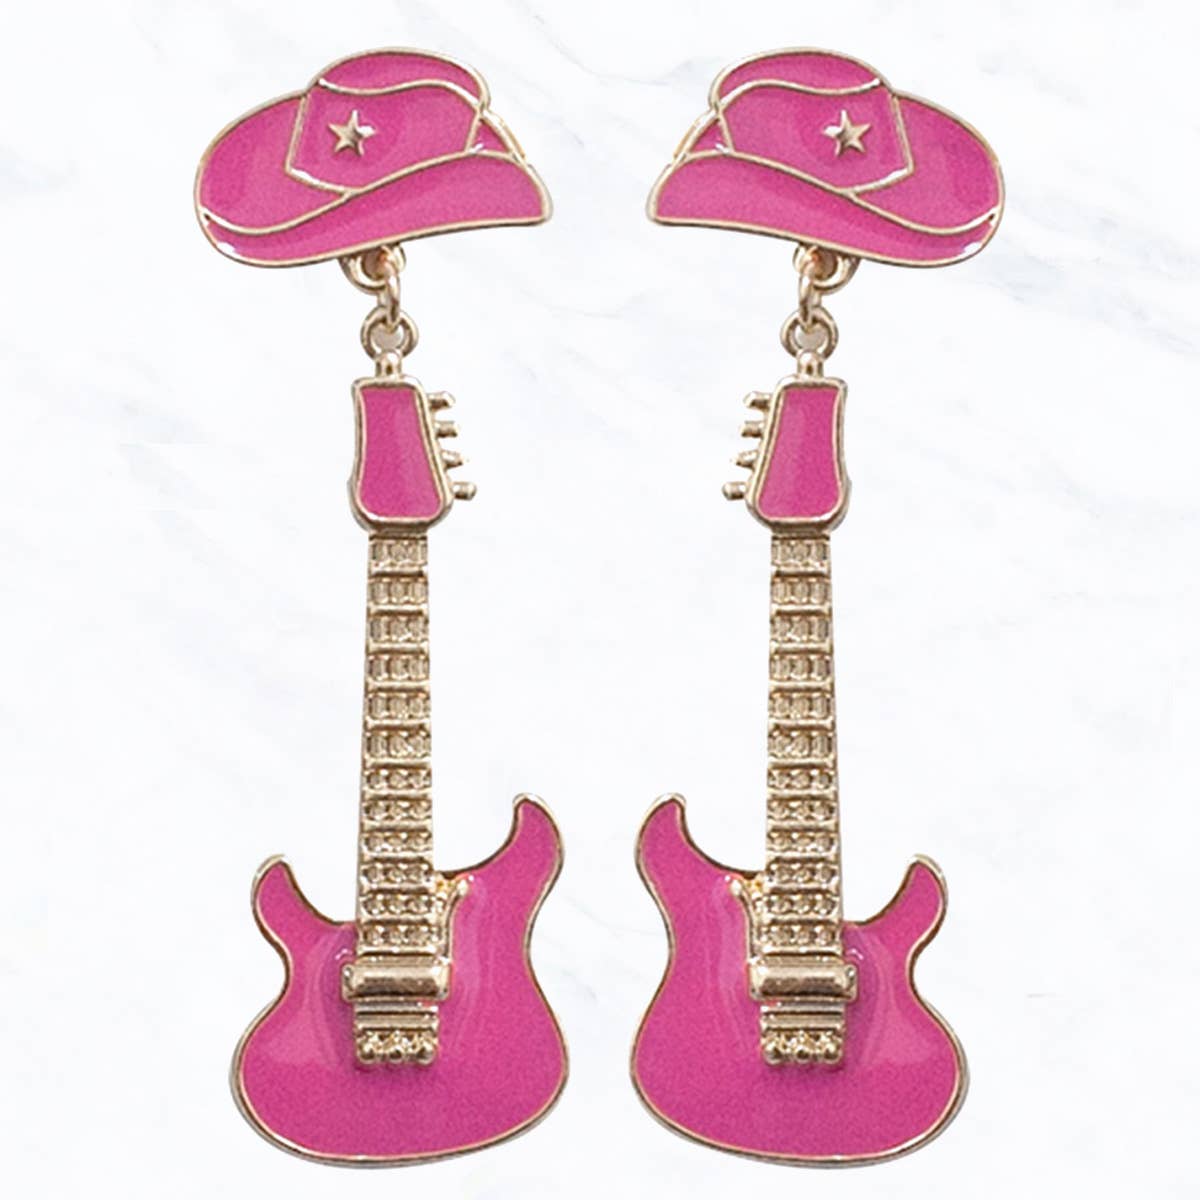 Pink Country Style Hat and Guitar Drop Earrings